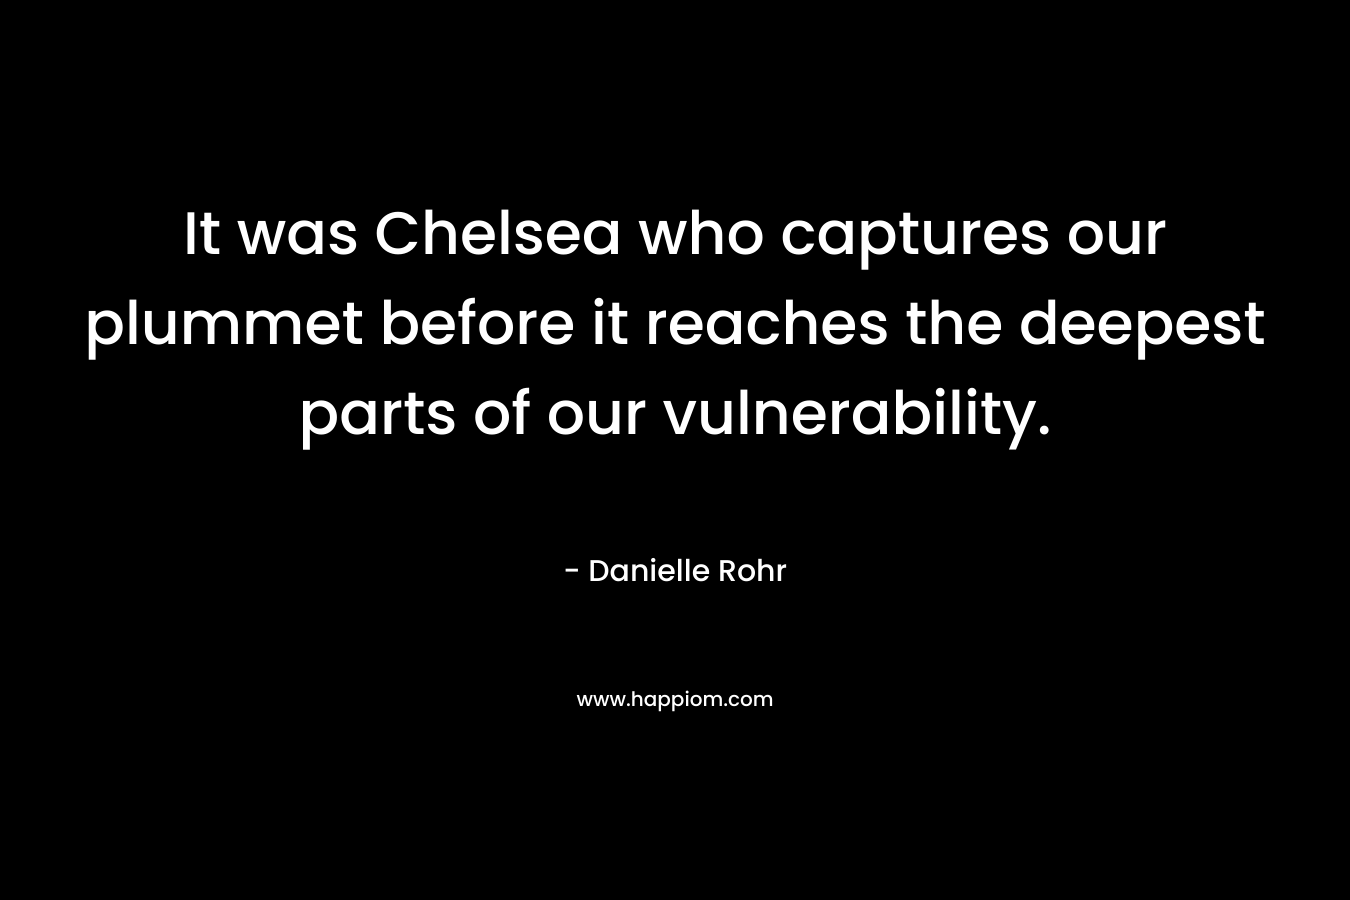 It was Chelsea who captures our plummet before it reaches the deepest parts of our vulnerability. – Danielle Rohr